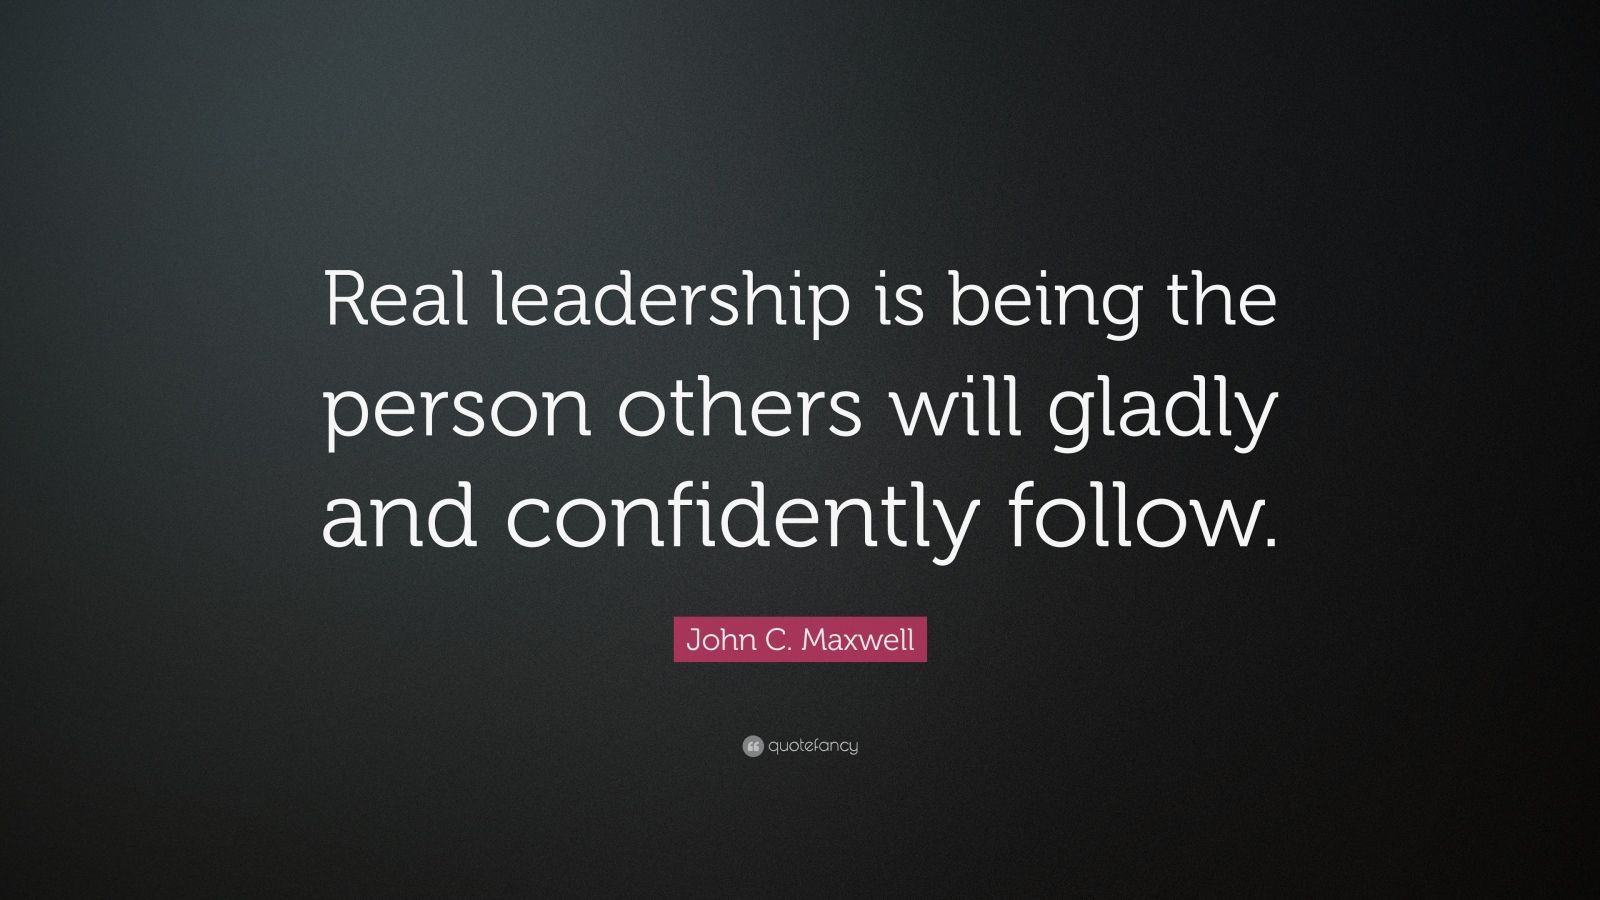 John C Maxwell Leadership Quotes
 John C Maxwell Quote “Real leadership is being the